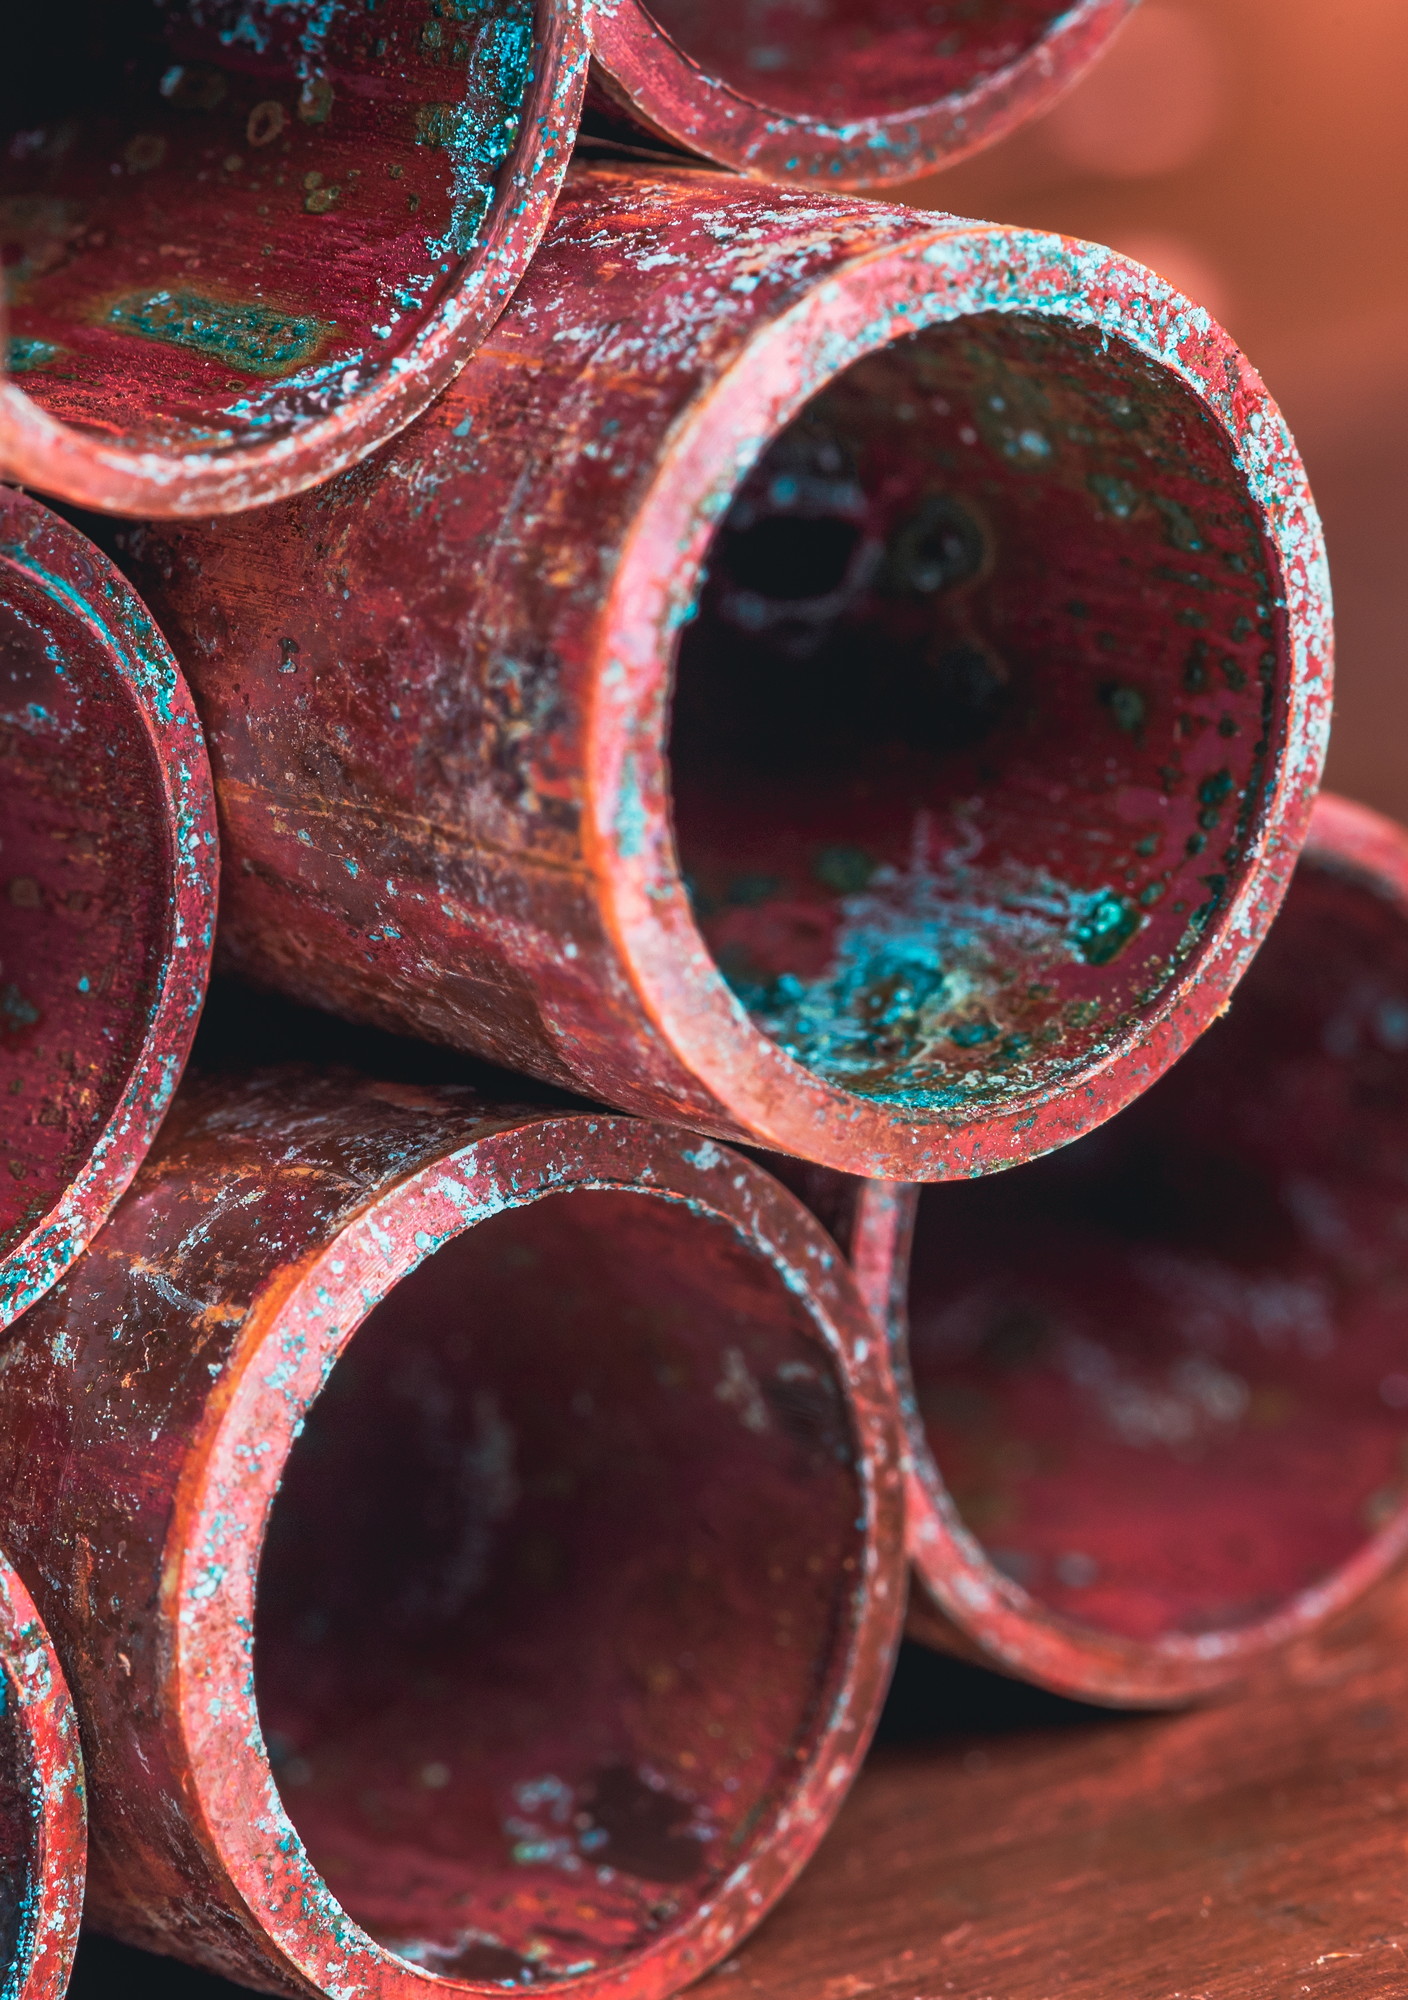 Copper Pipes Corroded